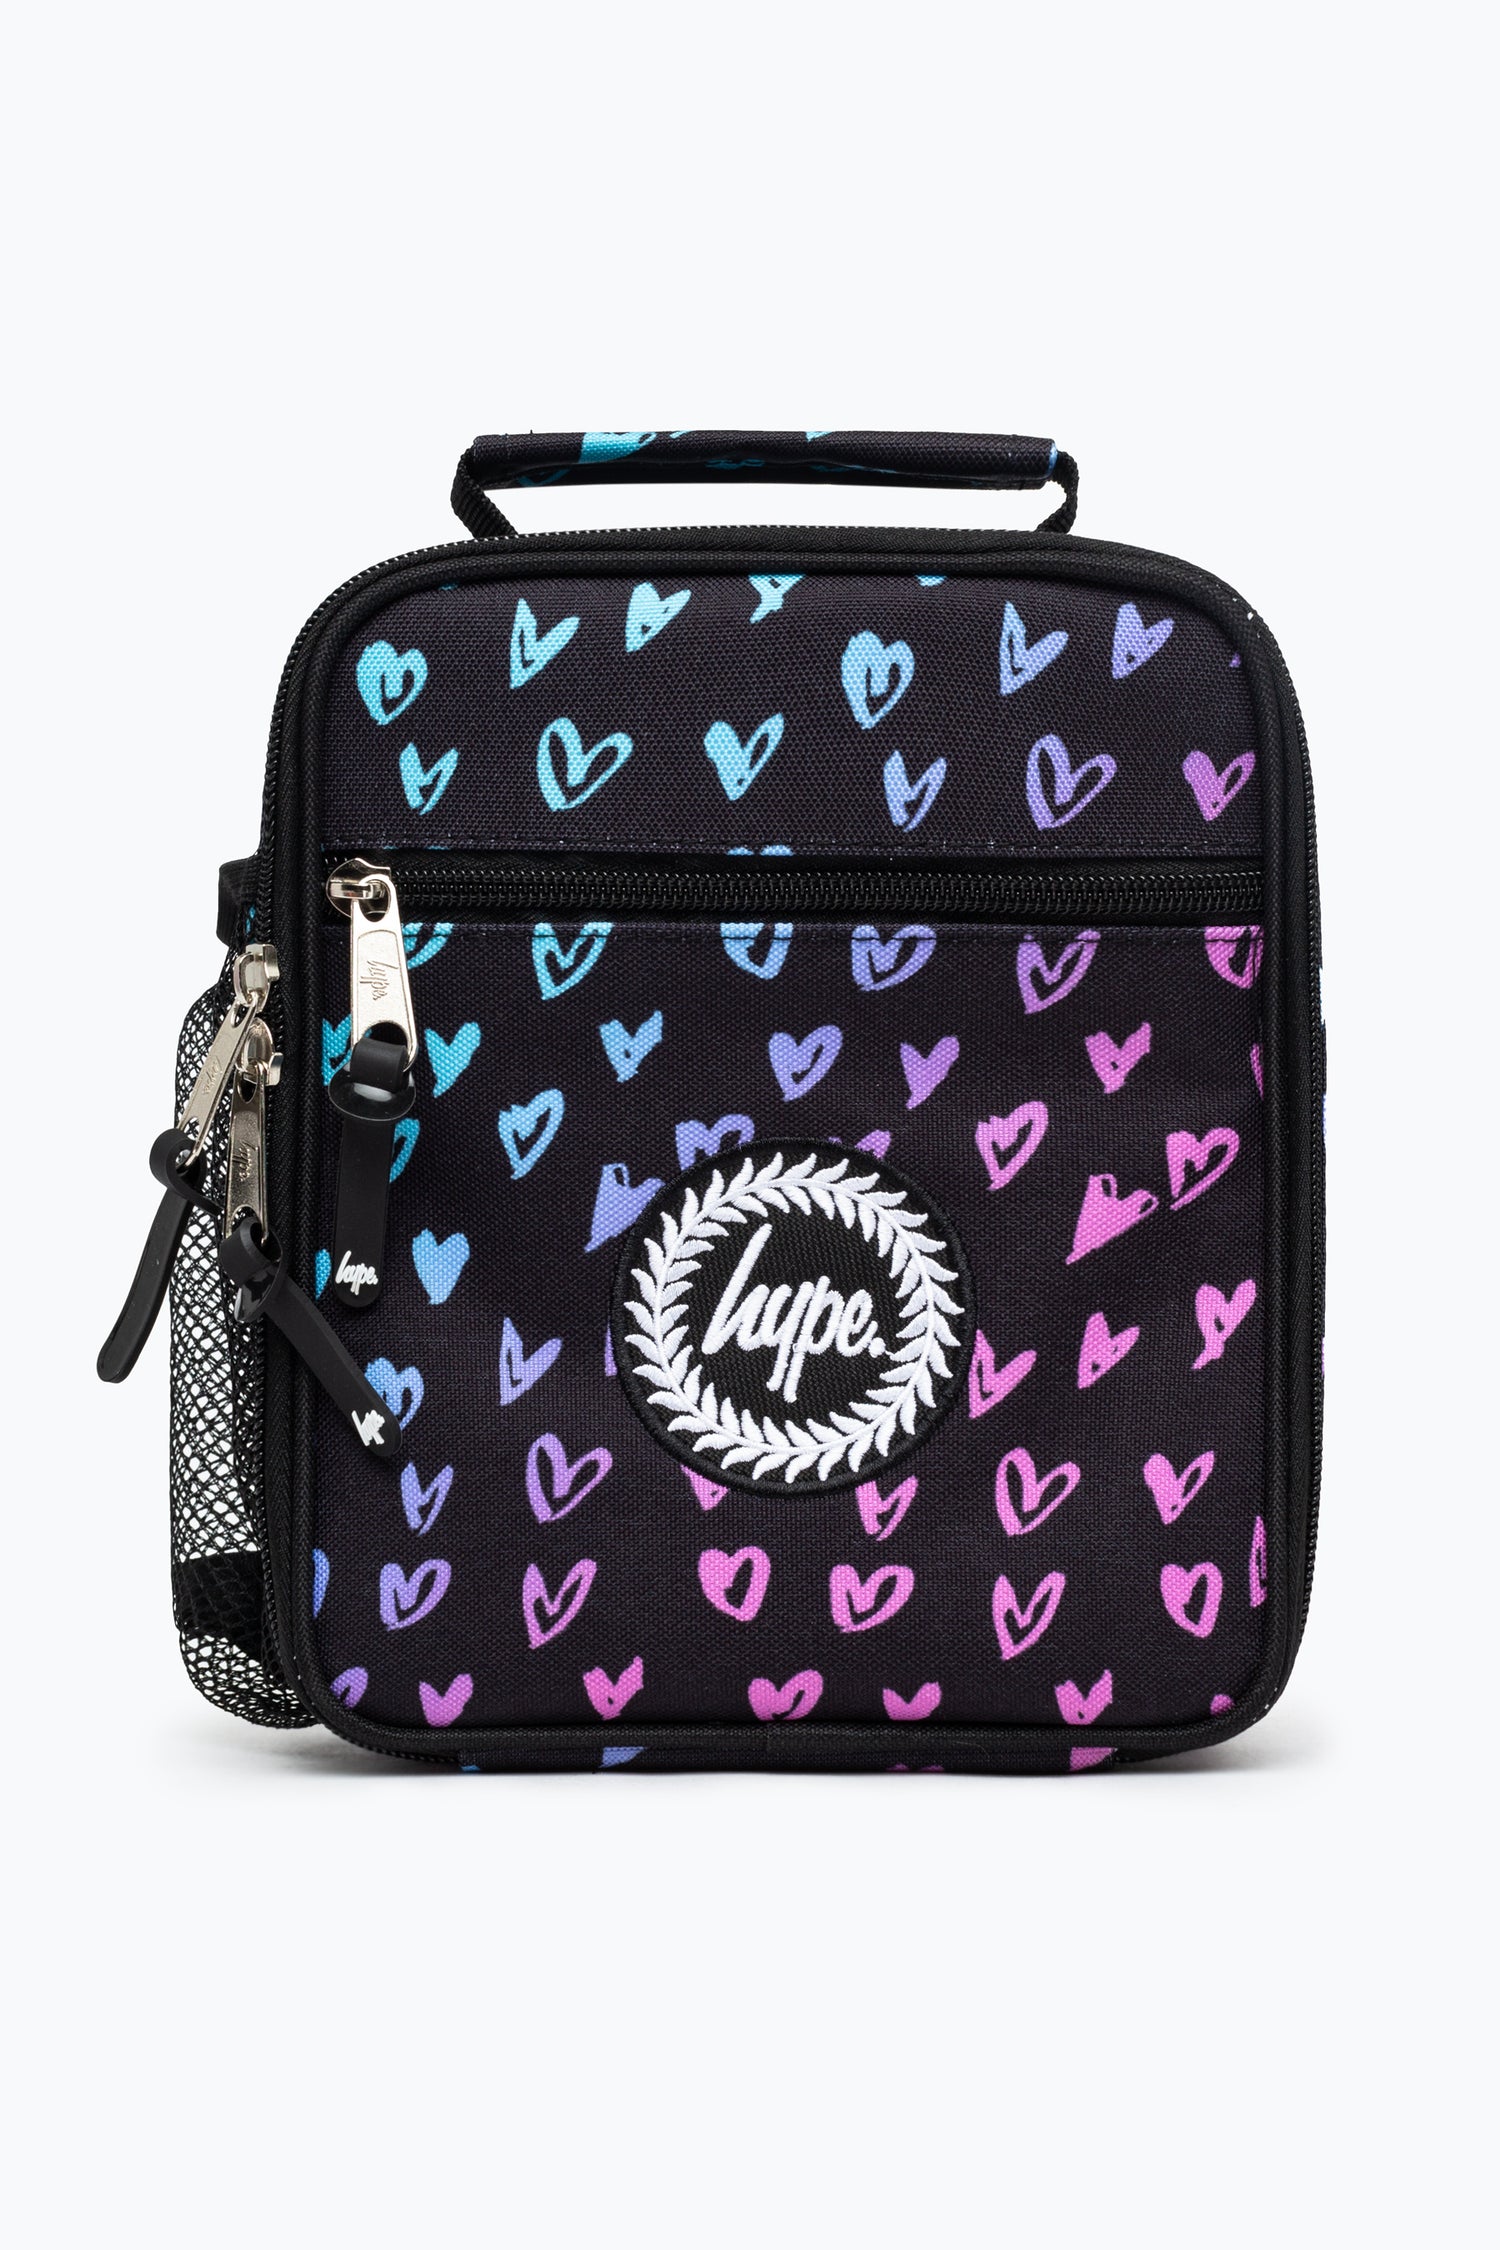 HYPE UNISEX SCRIBBLE HEART PINK CREST LUNCHBOX